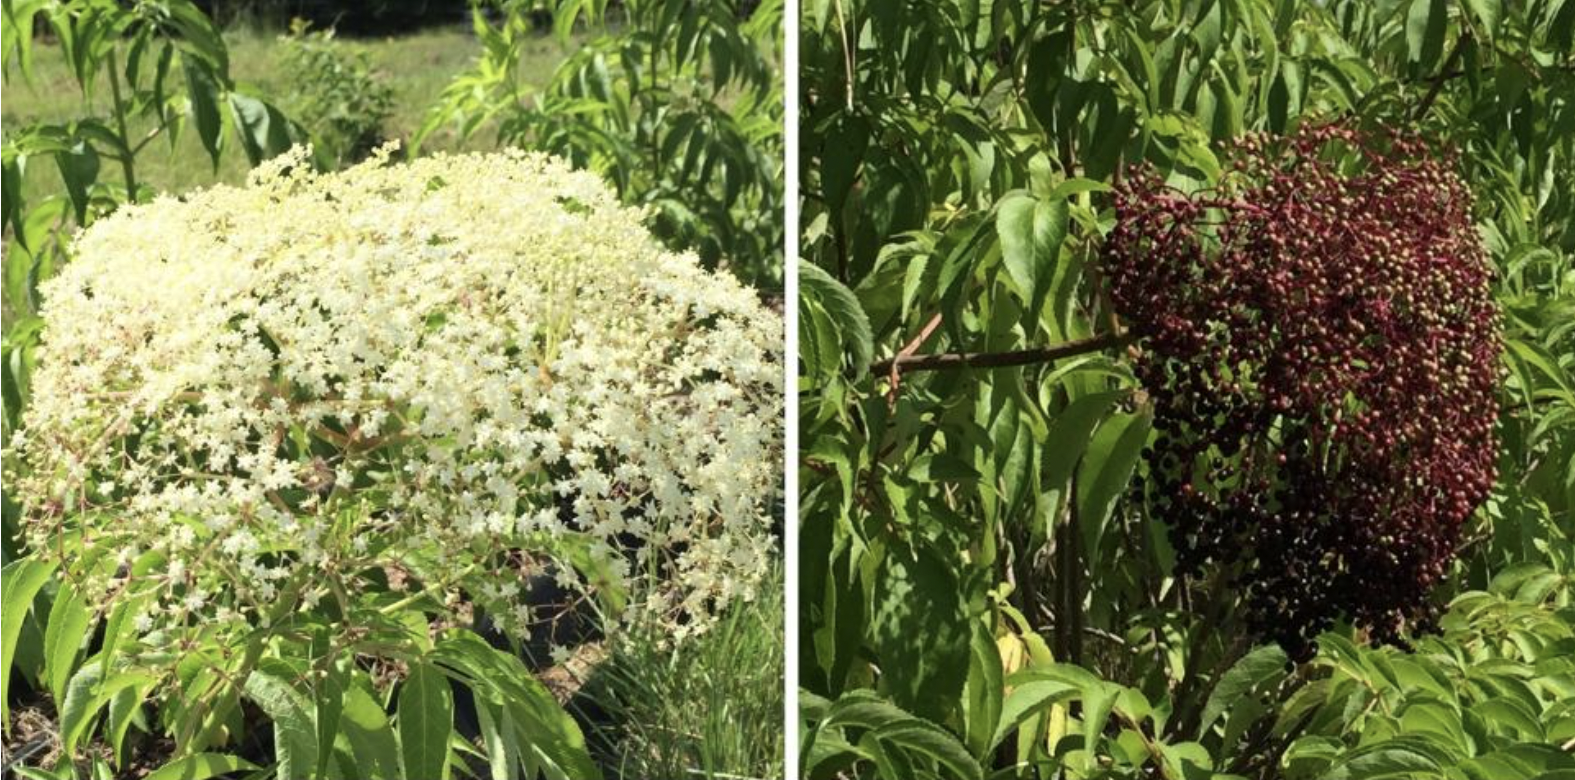 Featured image for “Elderberry Grows in Popularity Due to Health Benefits”